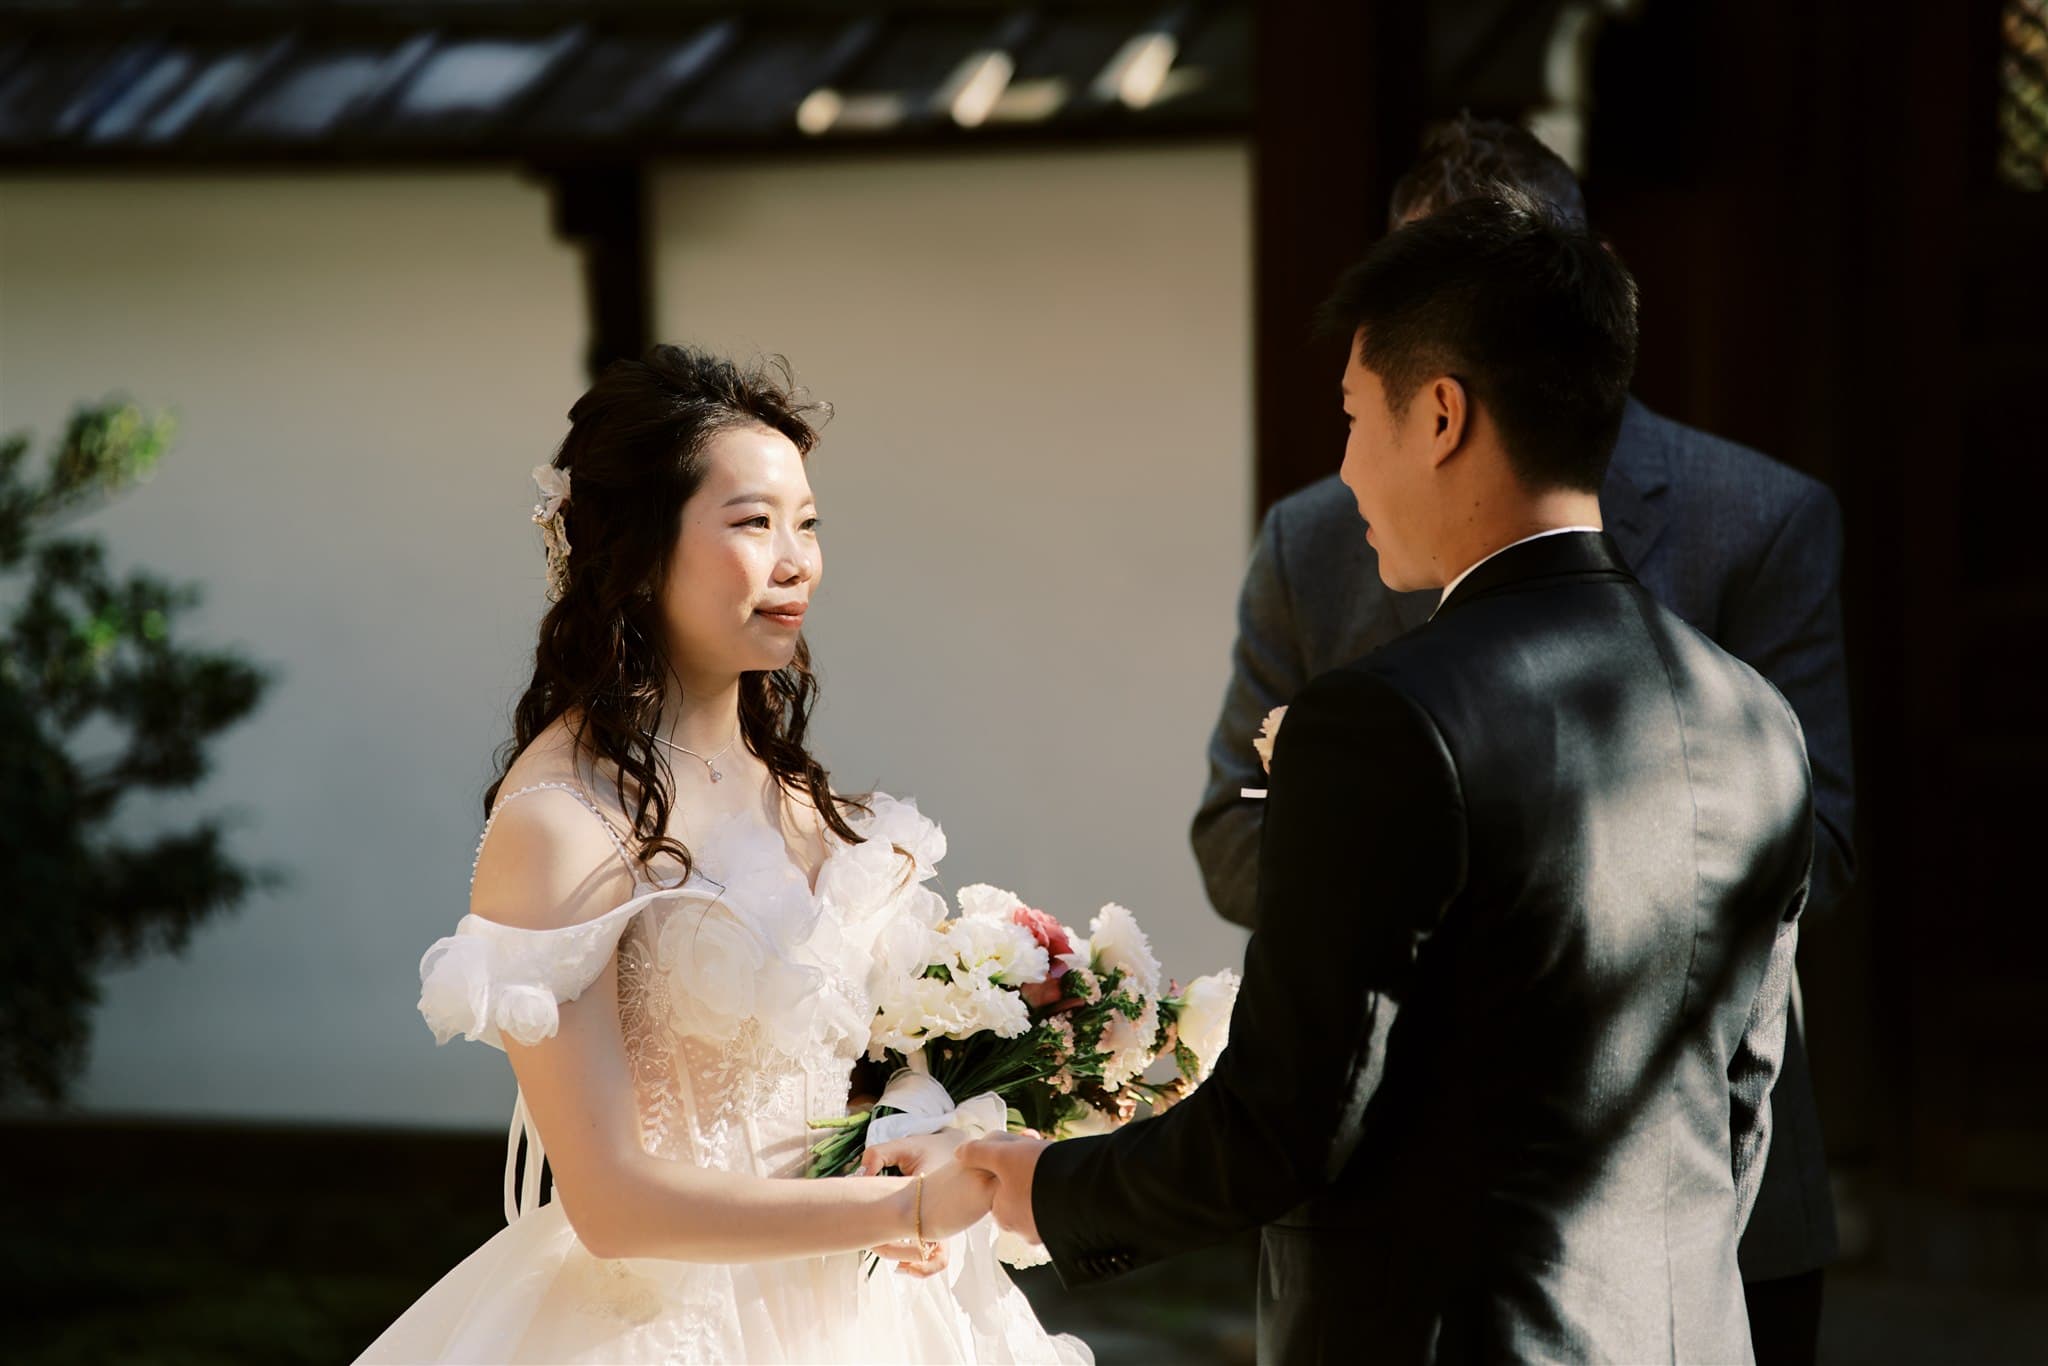 Kyoto Tokyo Japan Elopement Wedding Photographer, Planner & Videographer | A bride and groom are standing next to each other, captured by a skilled Japan elopement photographer at a beautiful wedding ceremony.